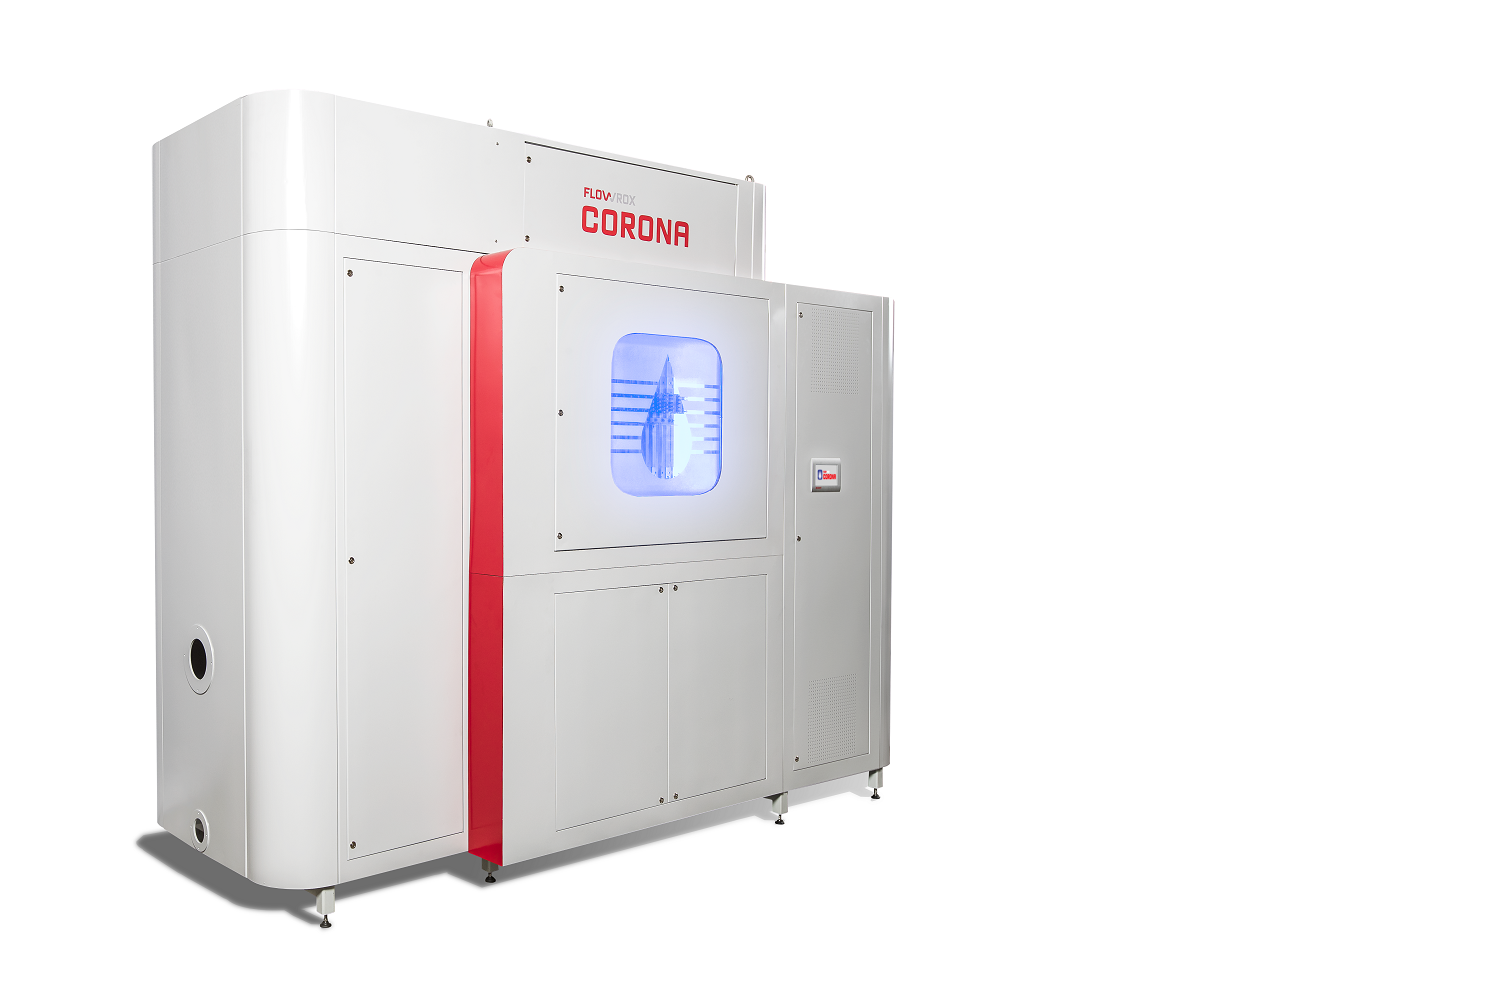 The Flowrox Corona is an industrial water treatment technology which replaces chemicals with non-thermal plasma.